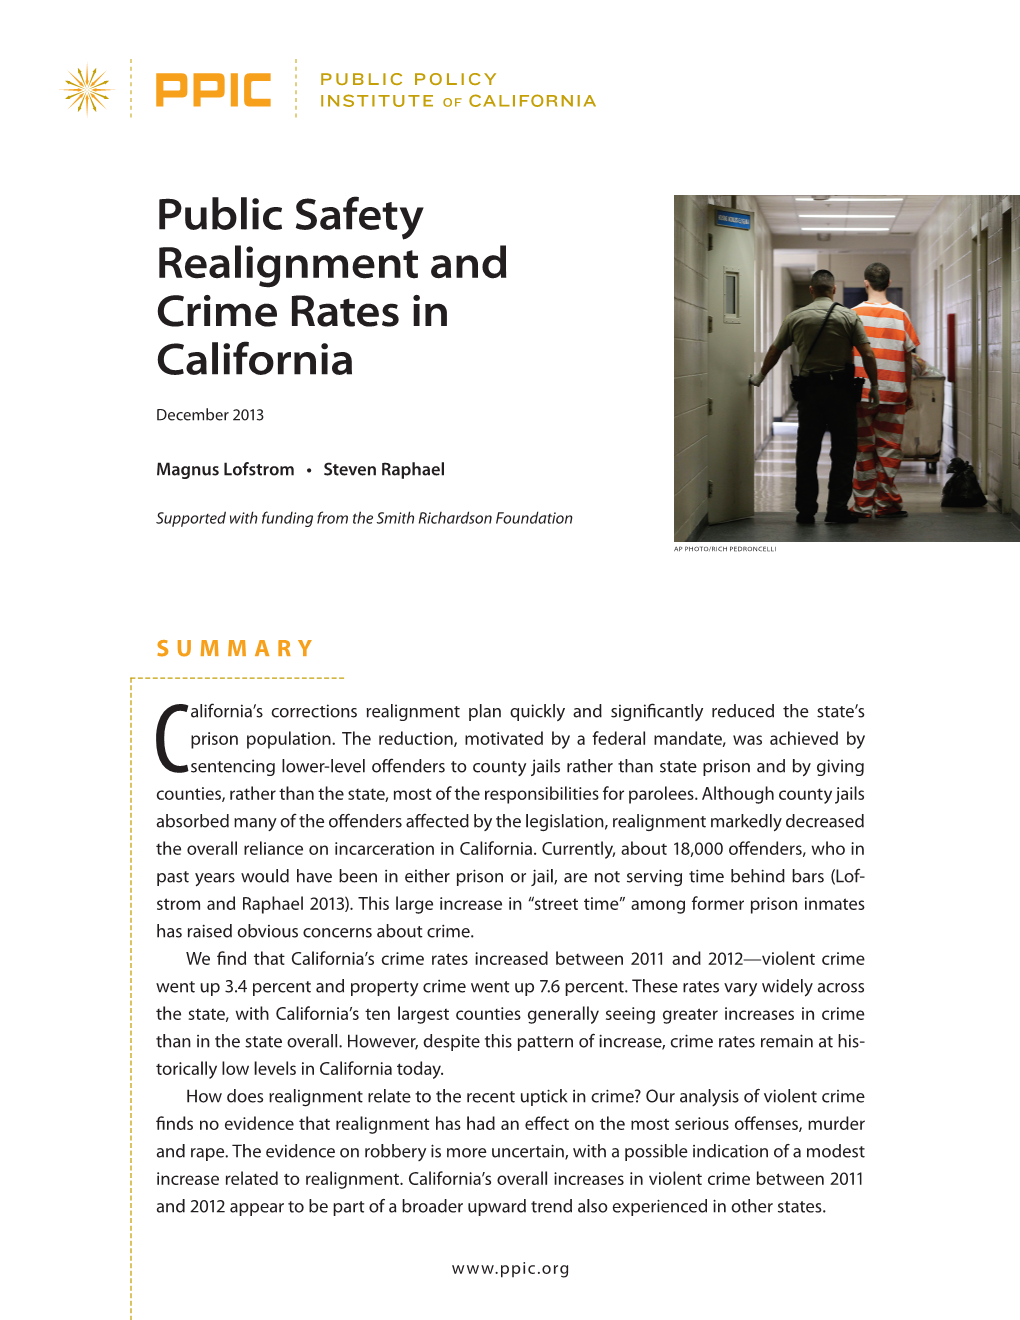 Public Safety Realignment and Crime Rates in California